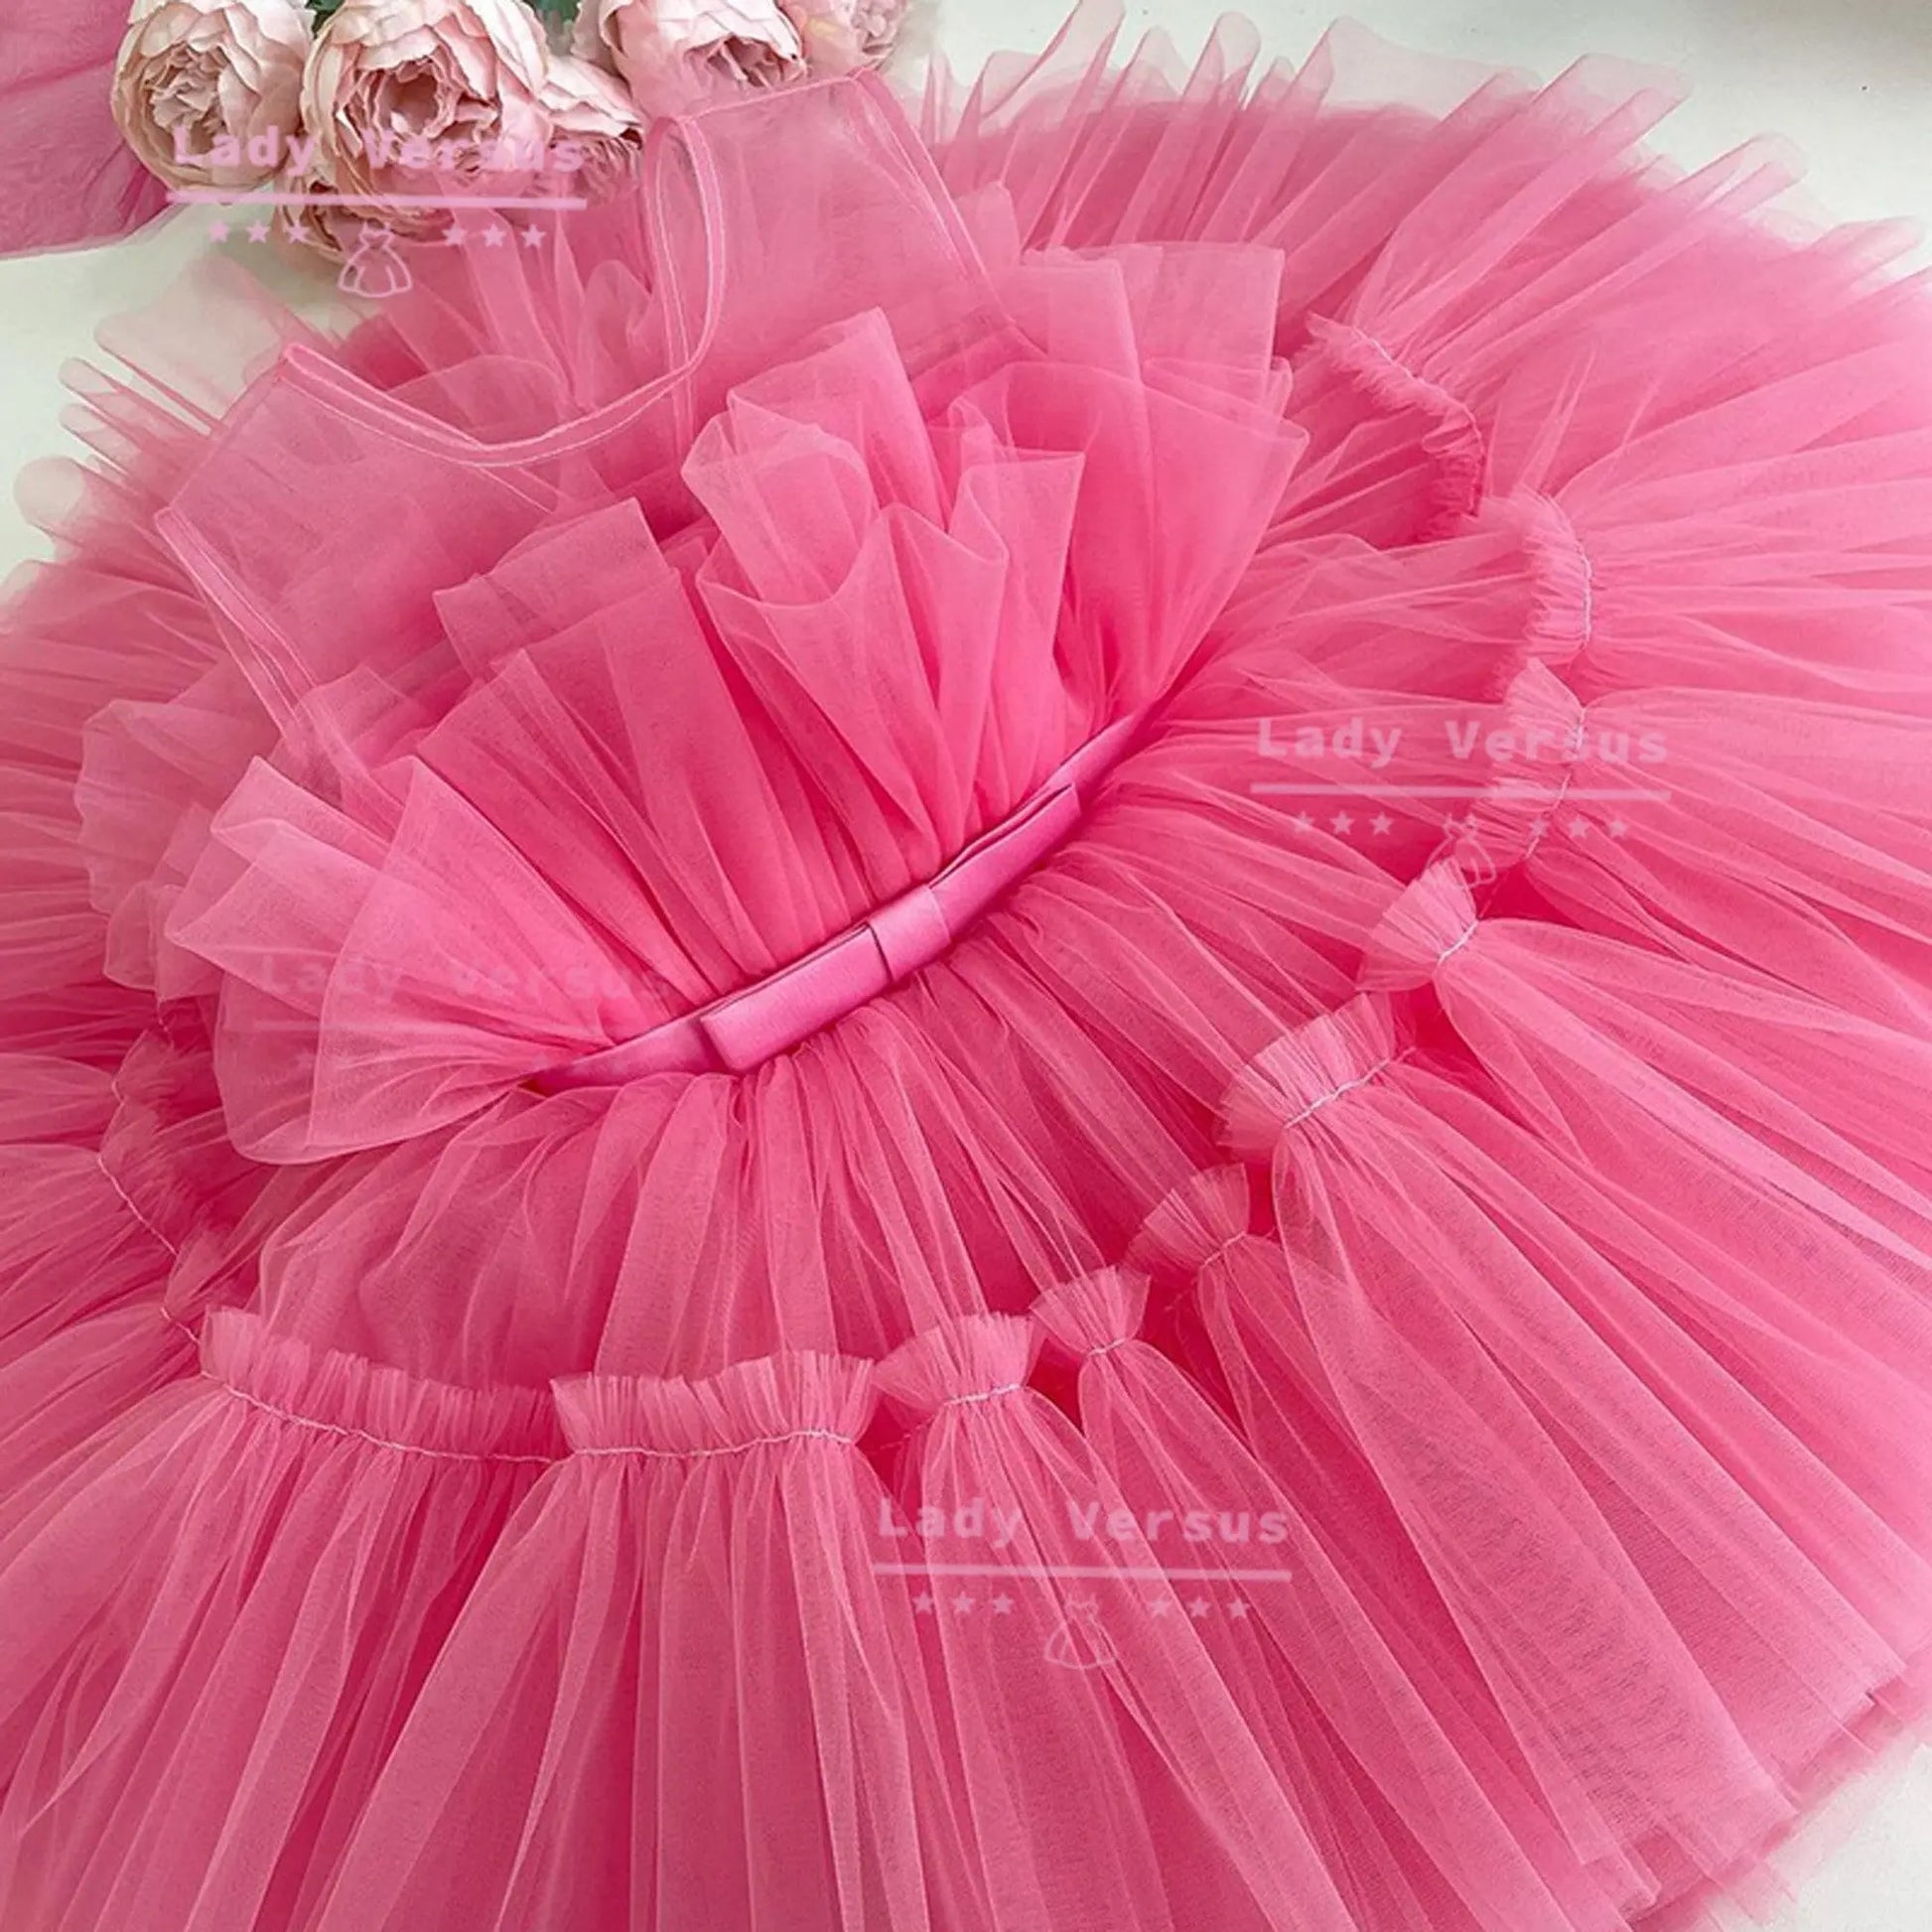 More Colours/ Baby girls party dress/Baby Girl 1st Birthday dress /  Girl dress/Flower girls dress/ Princess  dress/ Birthday dress Lady Versus